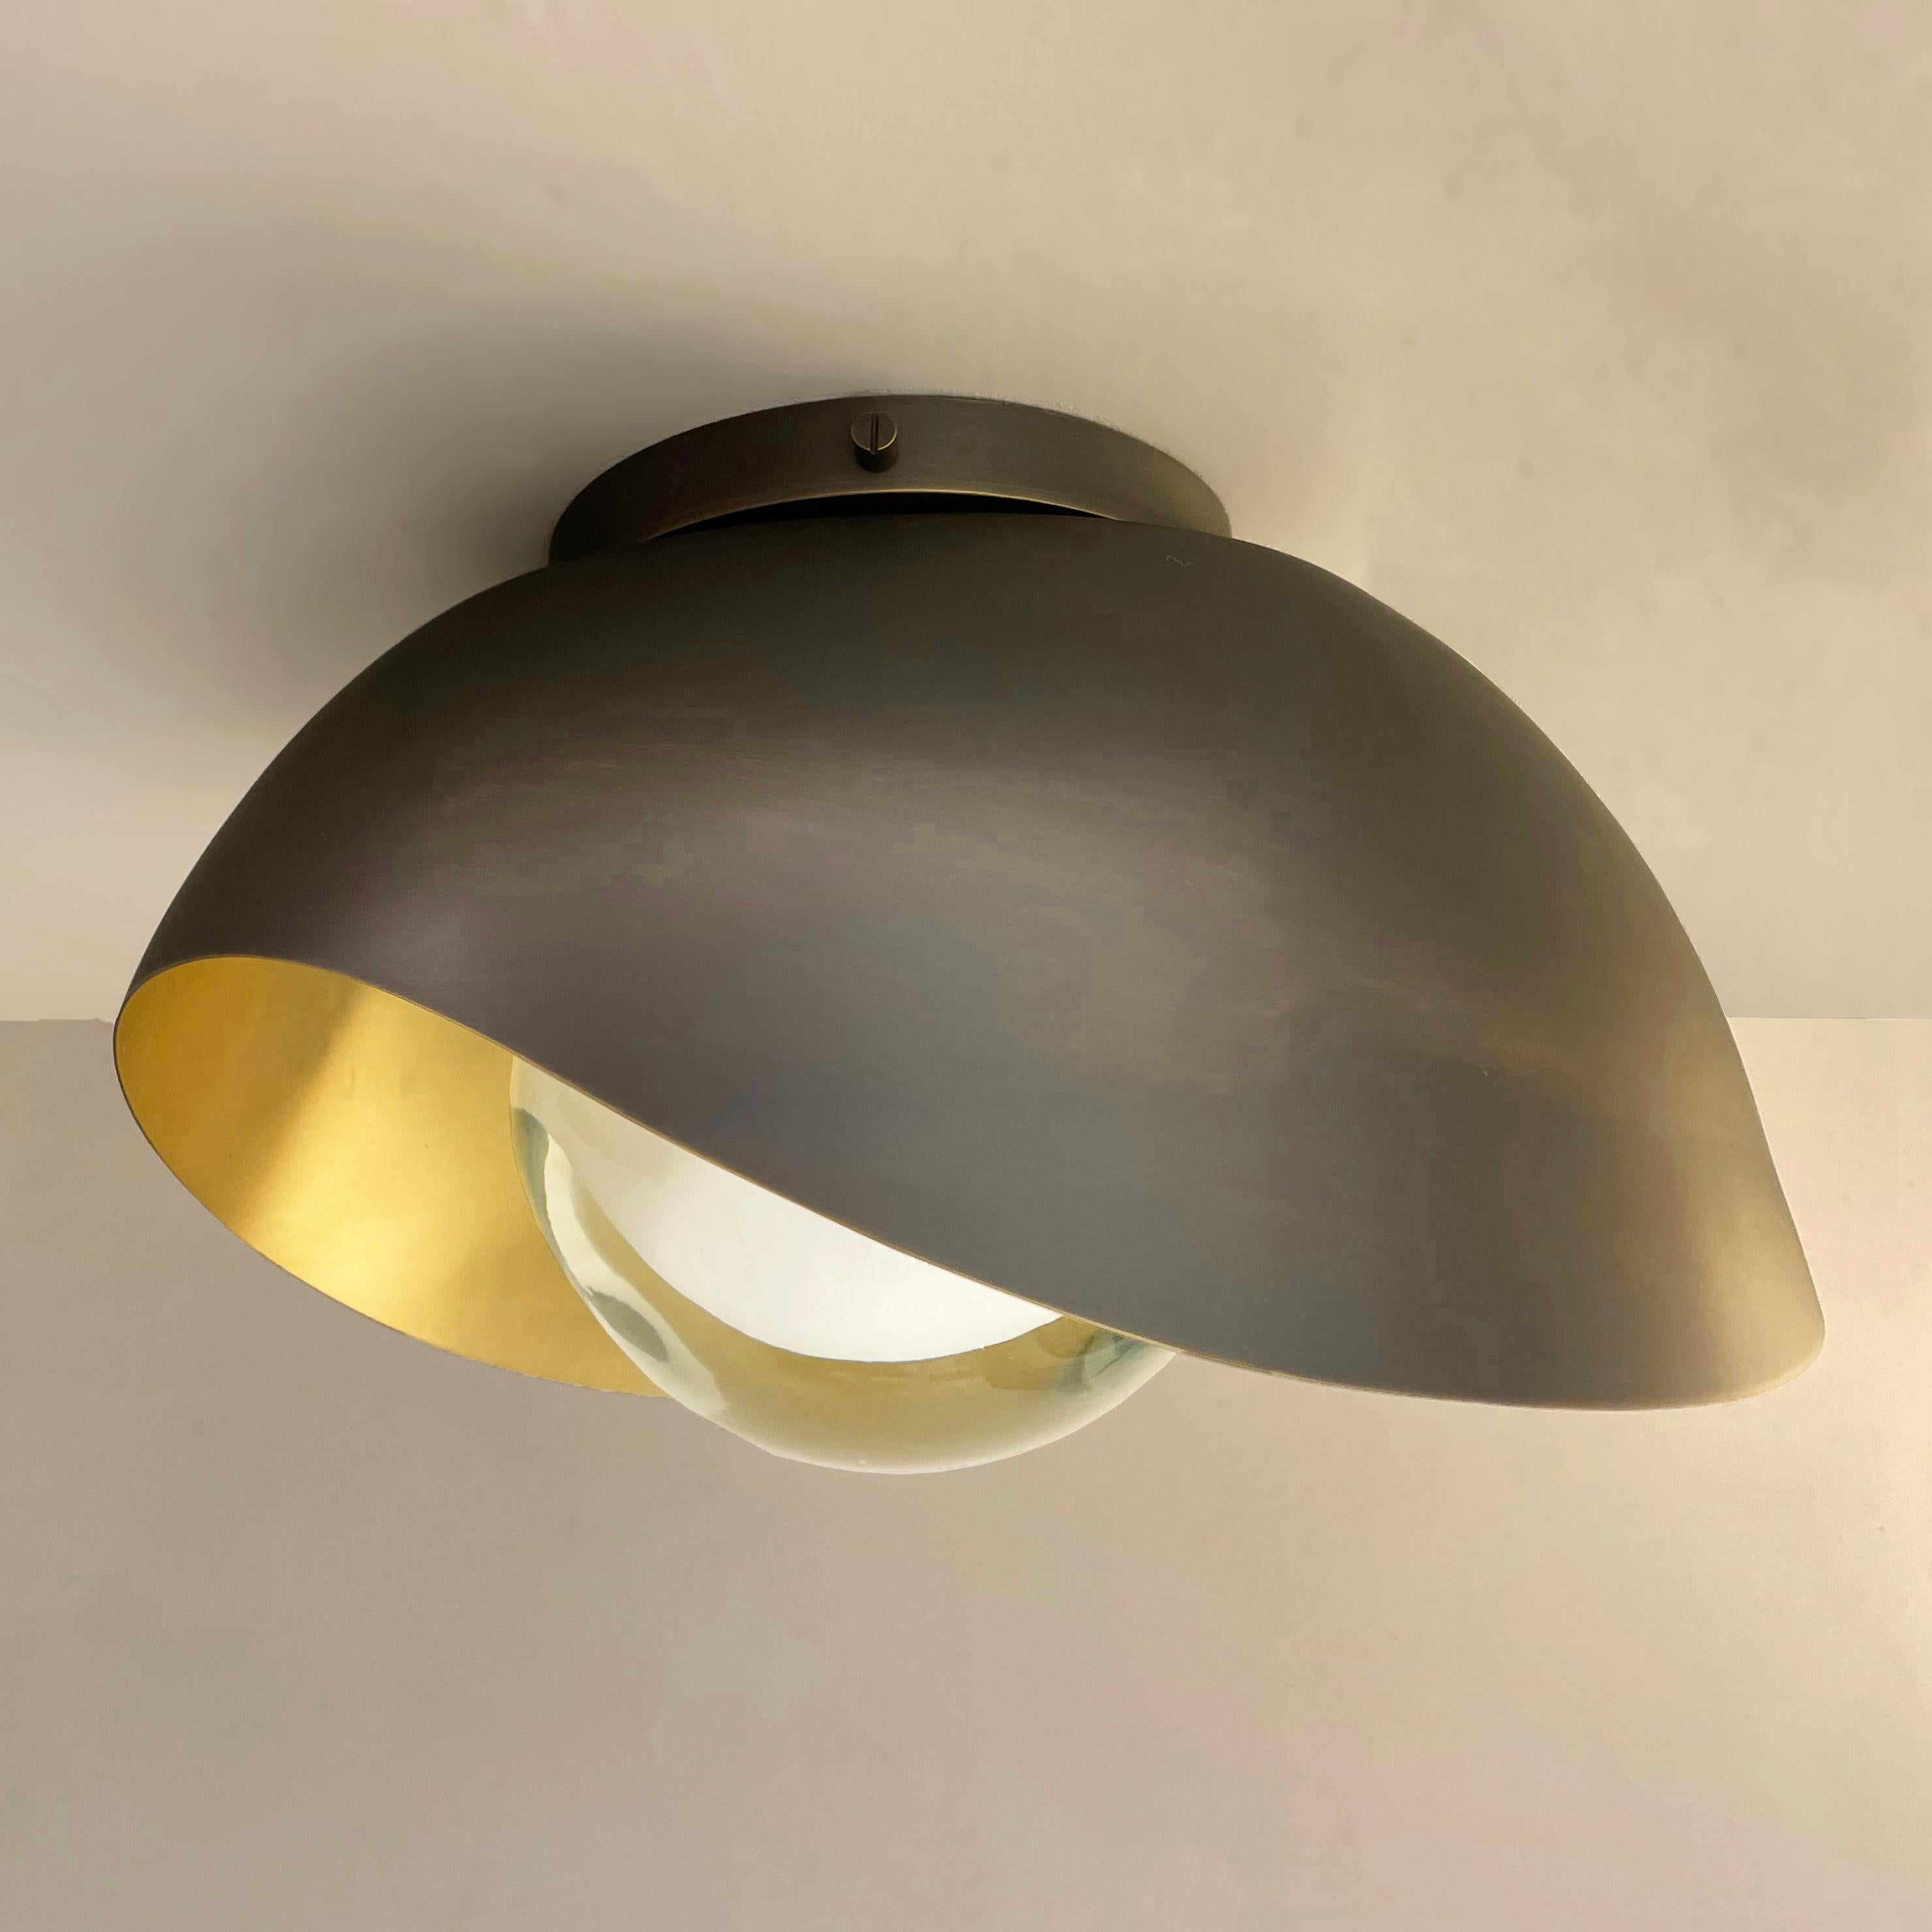 Perla Flushmount Ceiling Light by Gaspare Asaro-Satin Brass/Polished Nickel For Sale 5